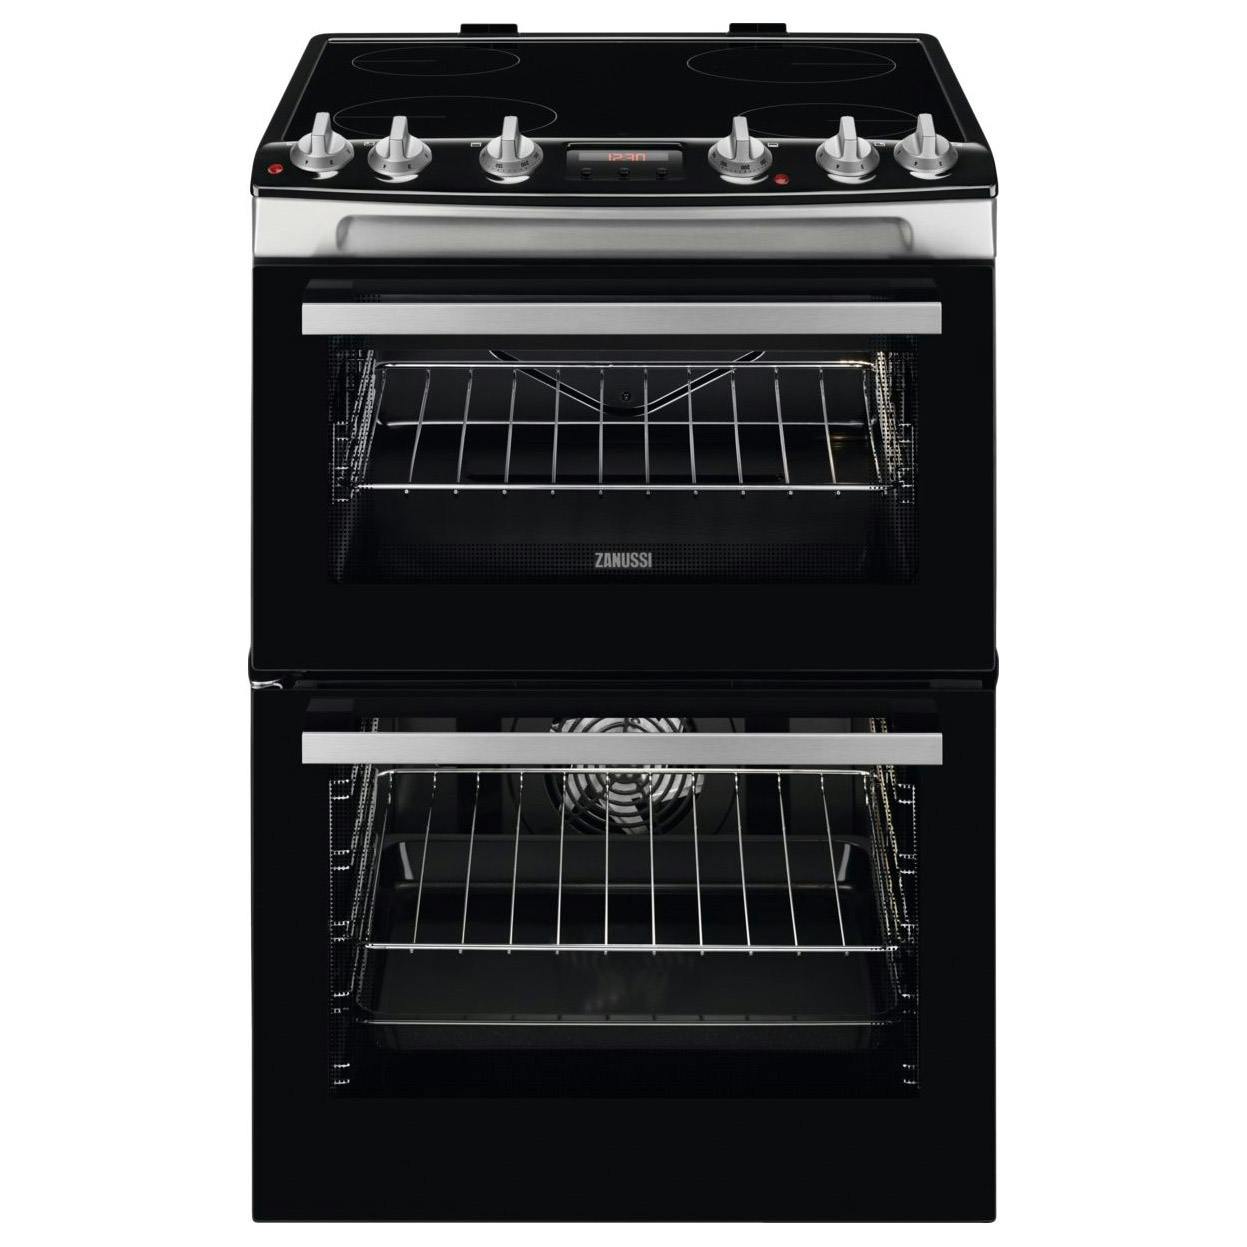 Zanussi 6 Burner Range With Oven And Storage Oven Cooktop Cook Top Stove Cooktop